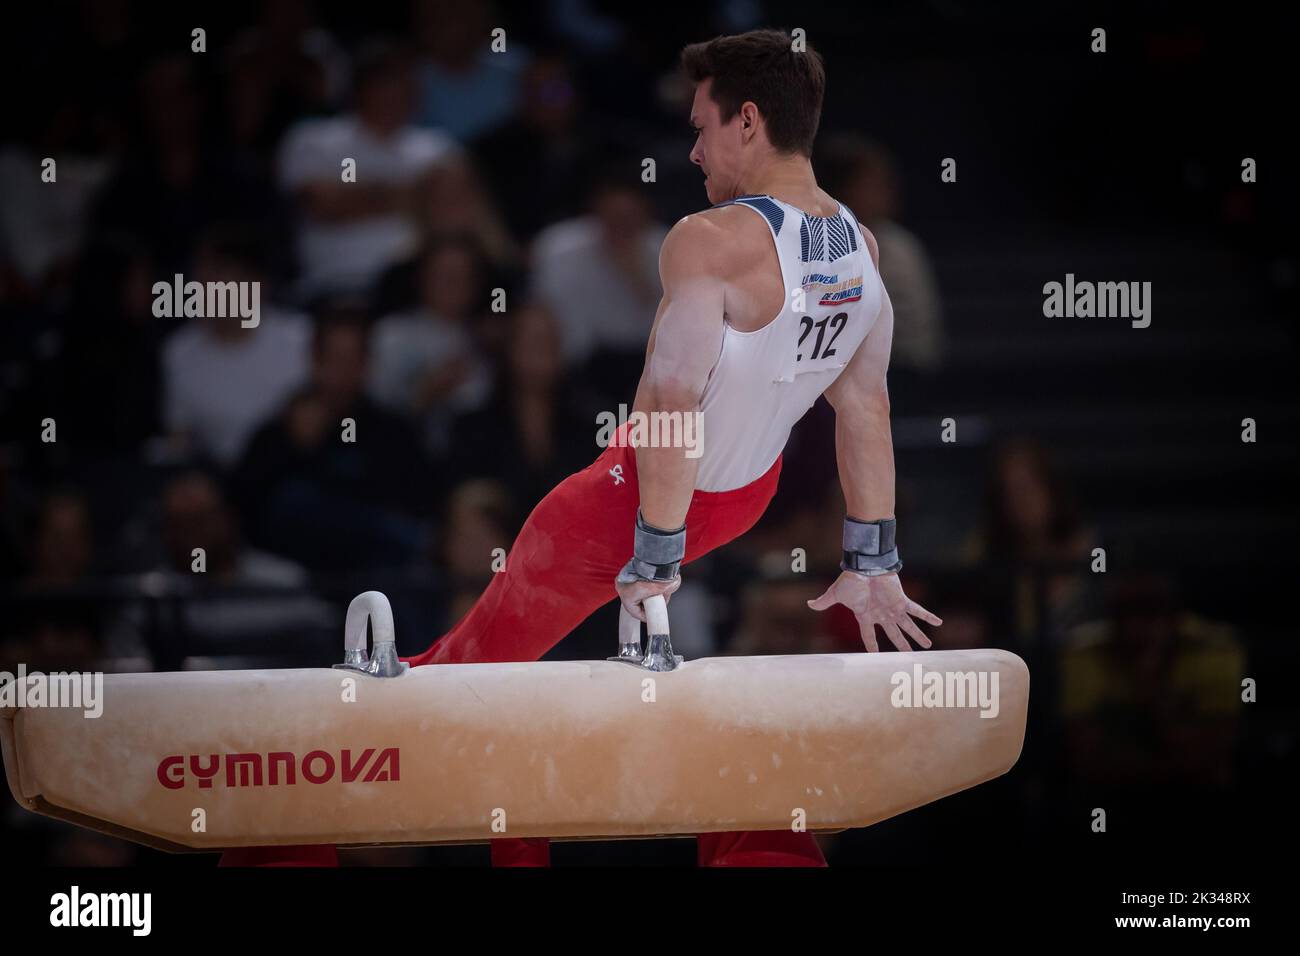 Paris, France, September 24th 2022 Brody Malone (USA) on Pommel Horse during the Artistic Gymnastics FIG World Challenge Cup in the Accor Arena in Paris, France Dan O' Connor (Dan O' Connor/SPP) Stock Photo